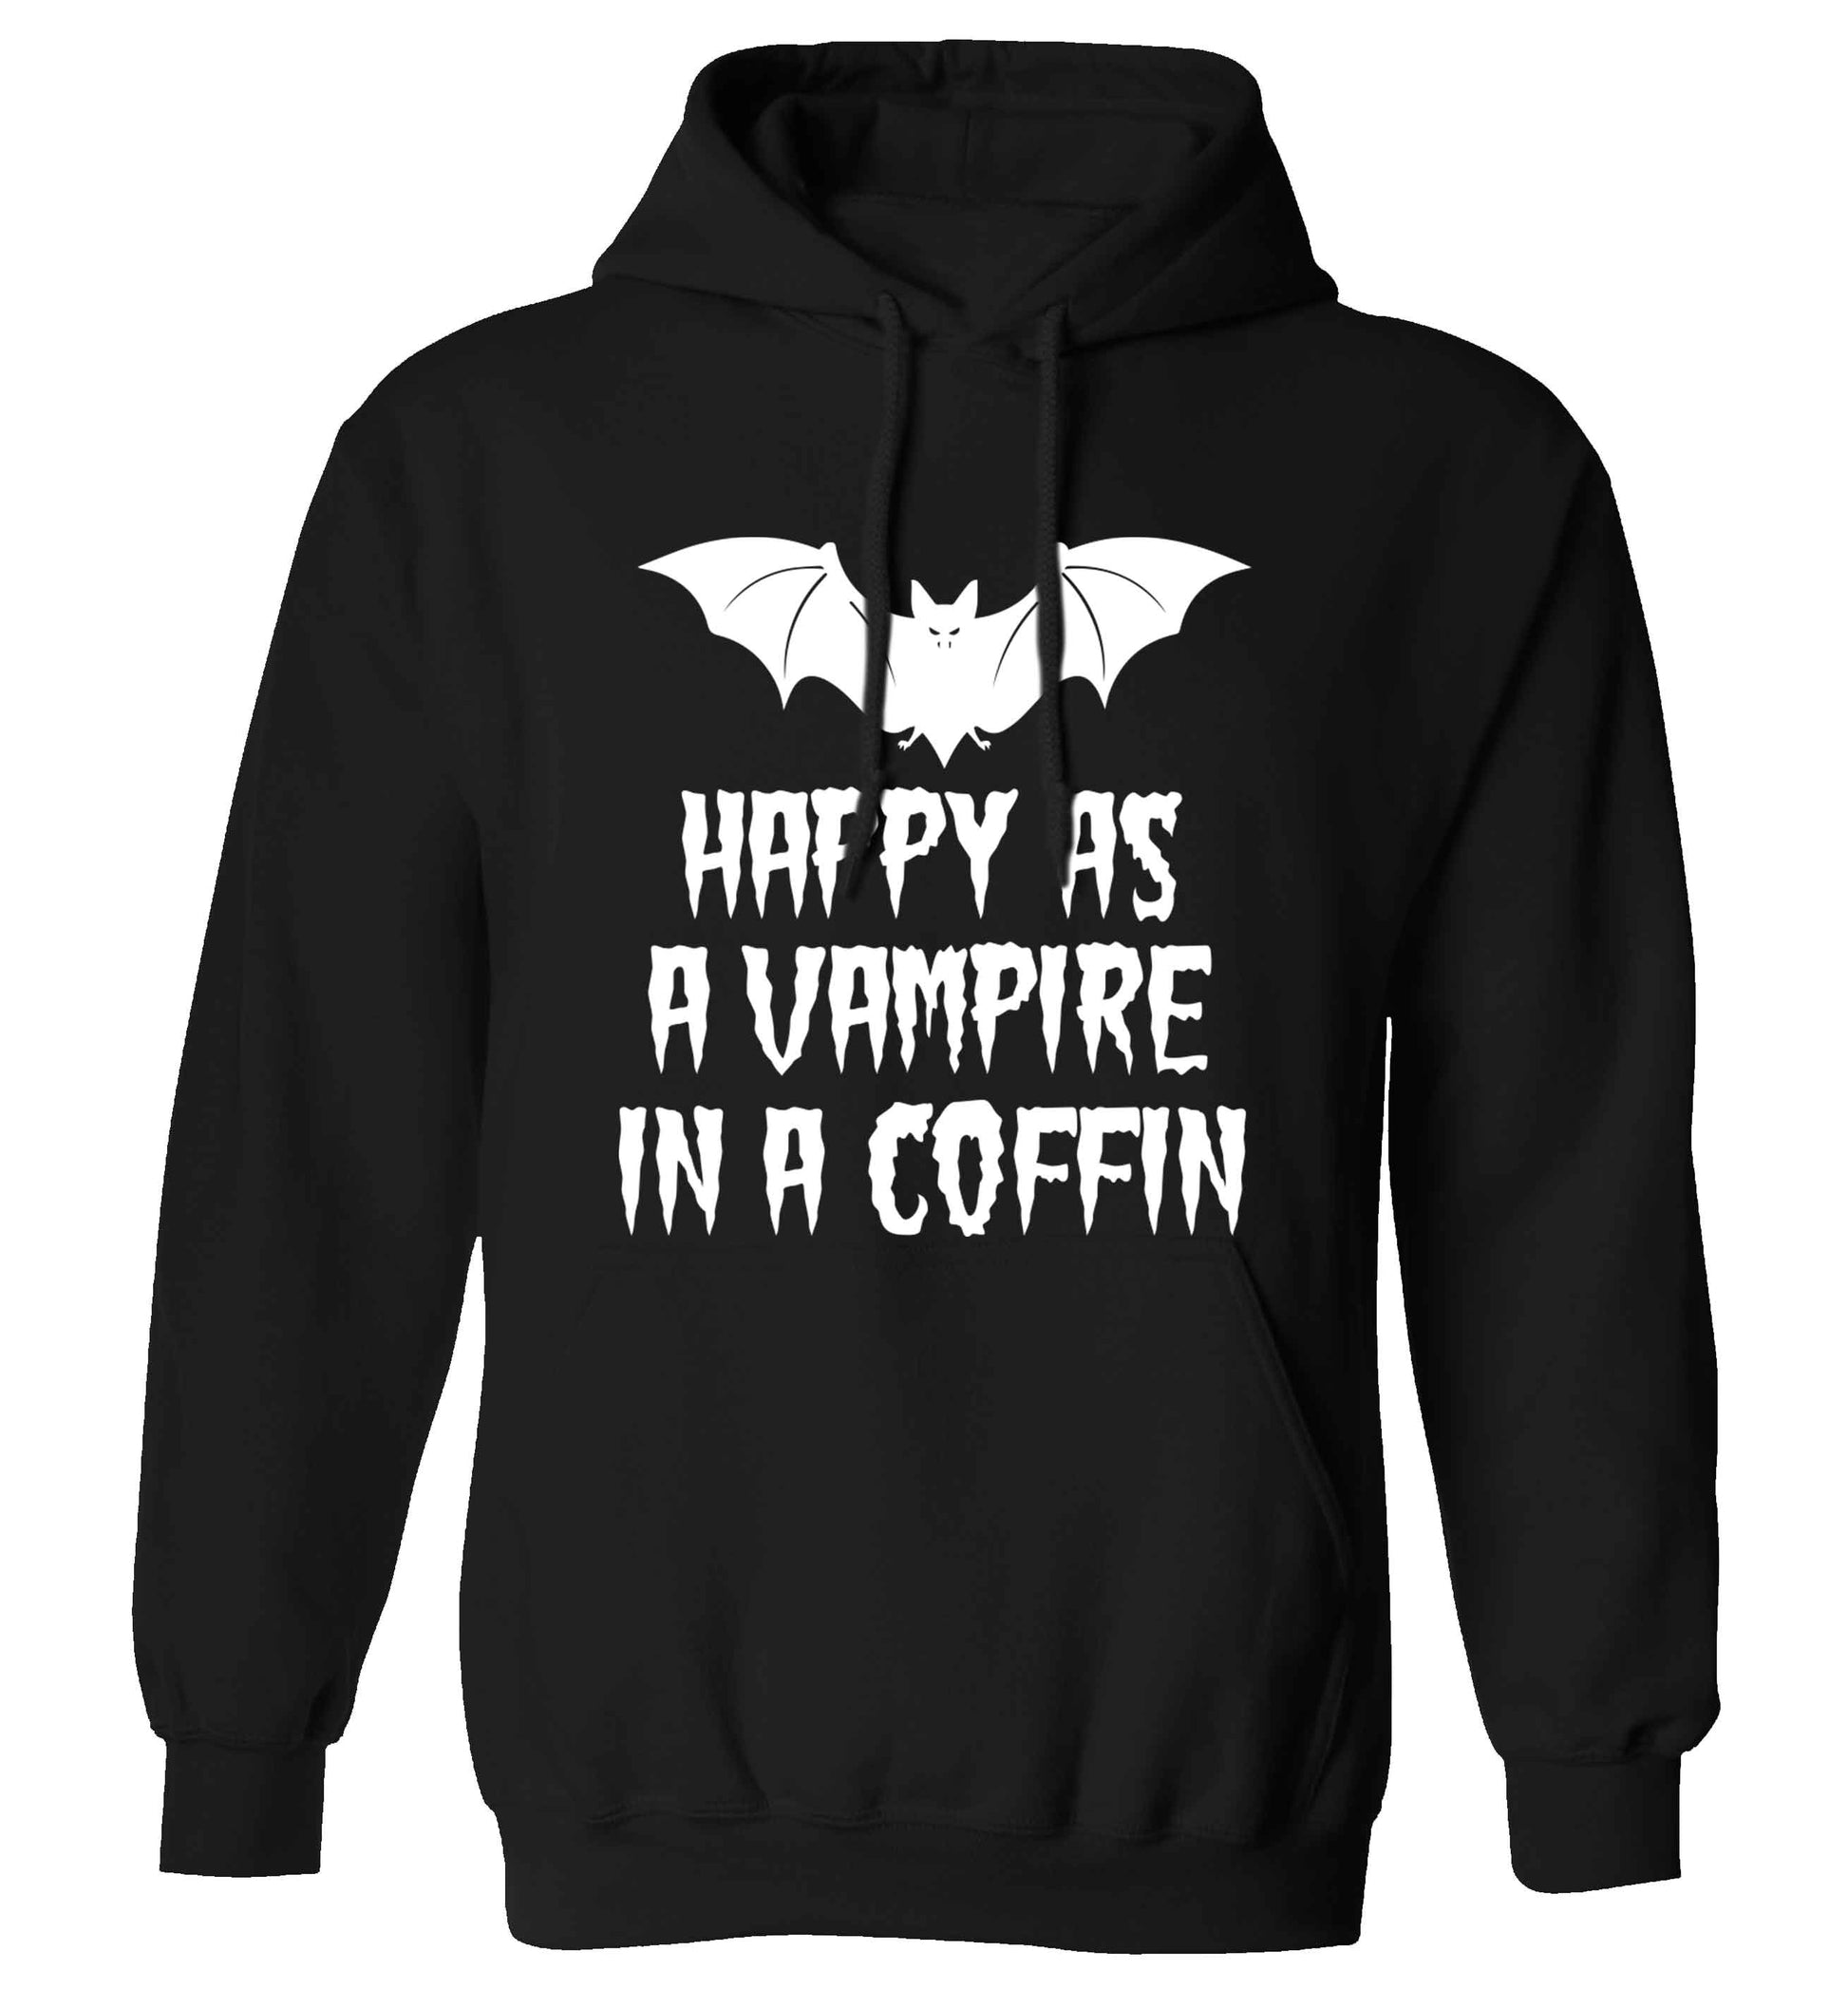 Happy as a vampire in a coffin adults unisex black hoodie 2XL